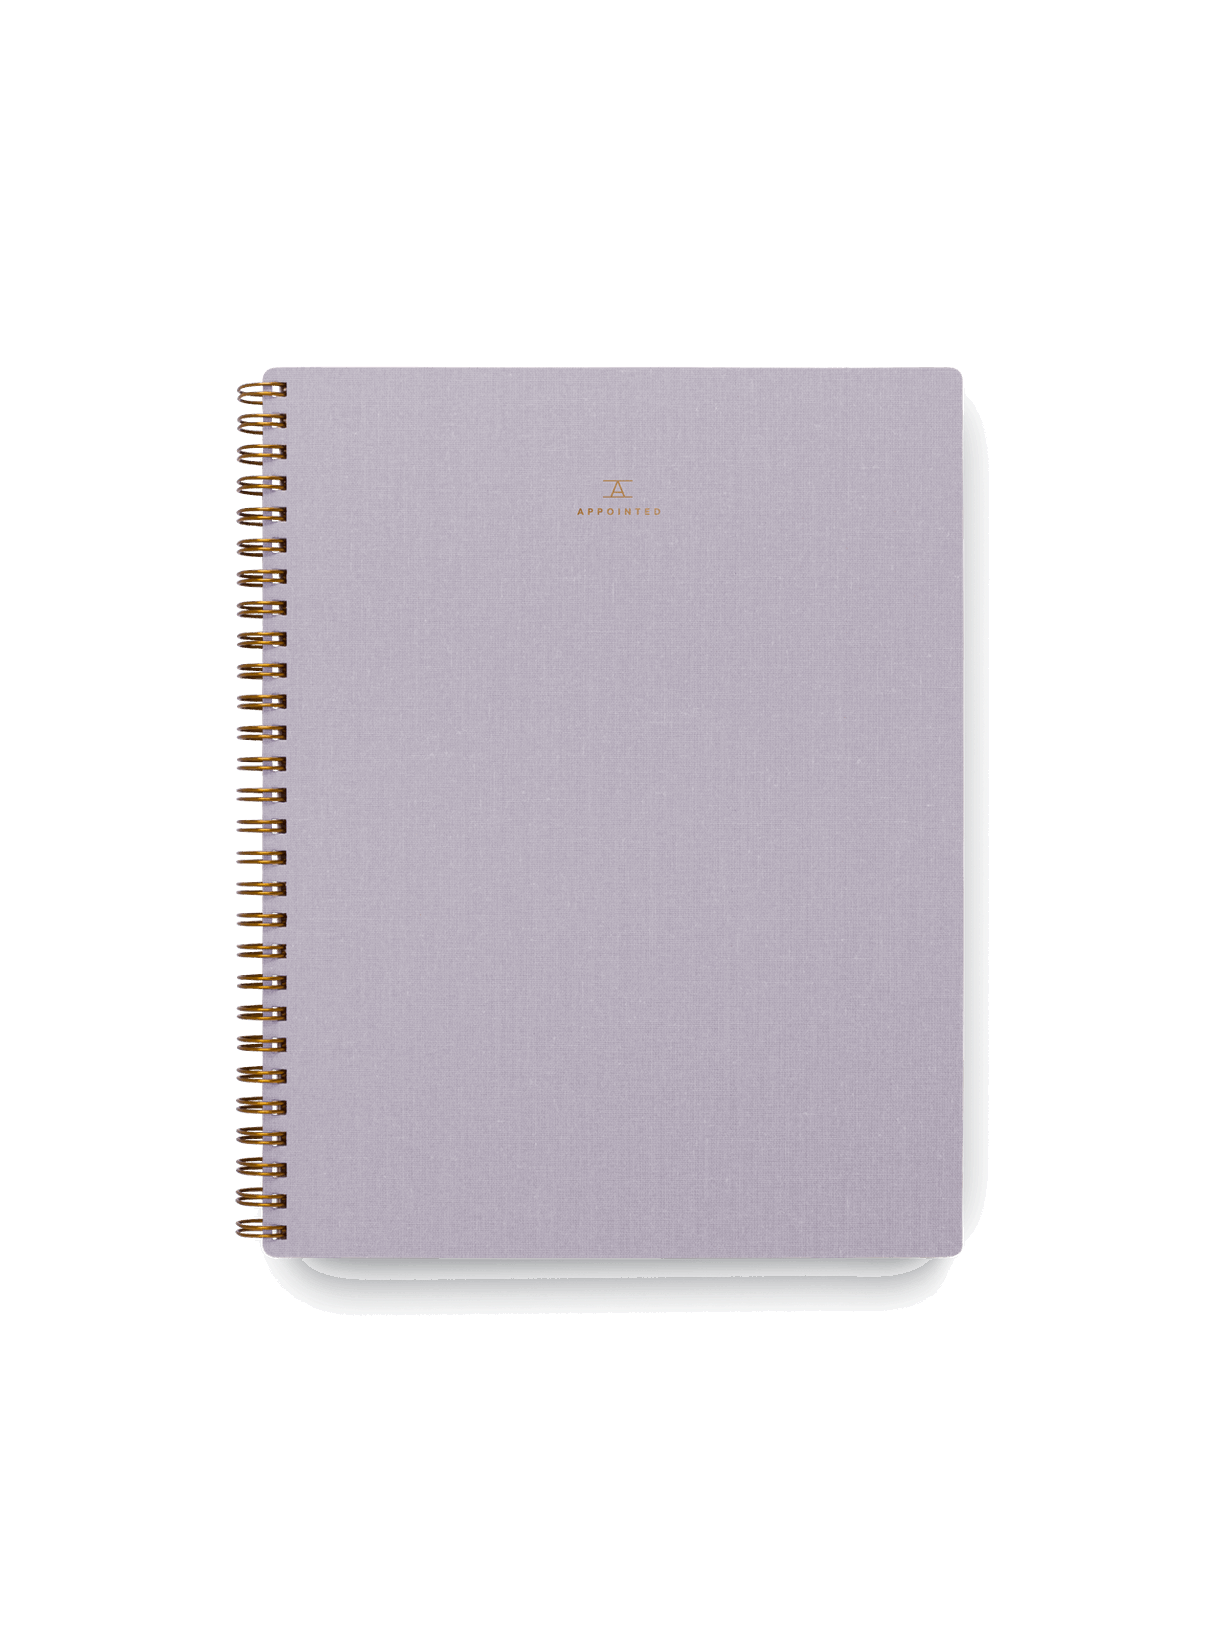 Lavender Gray Notebook By APPOINTED. CO.